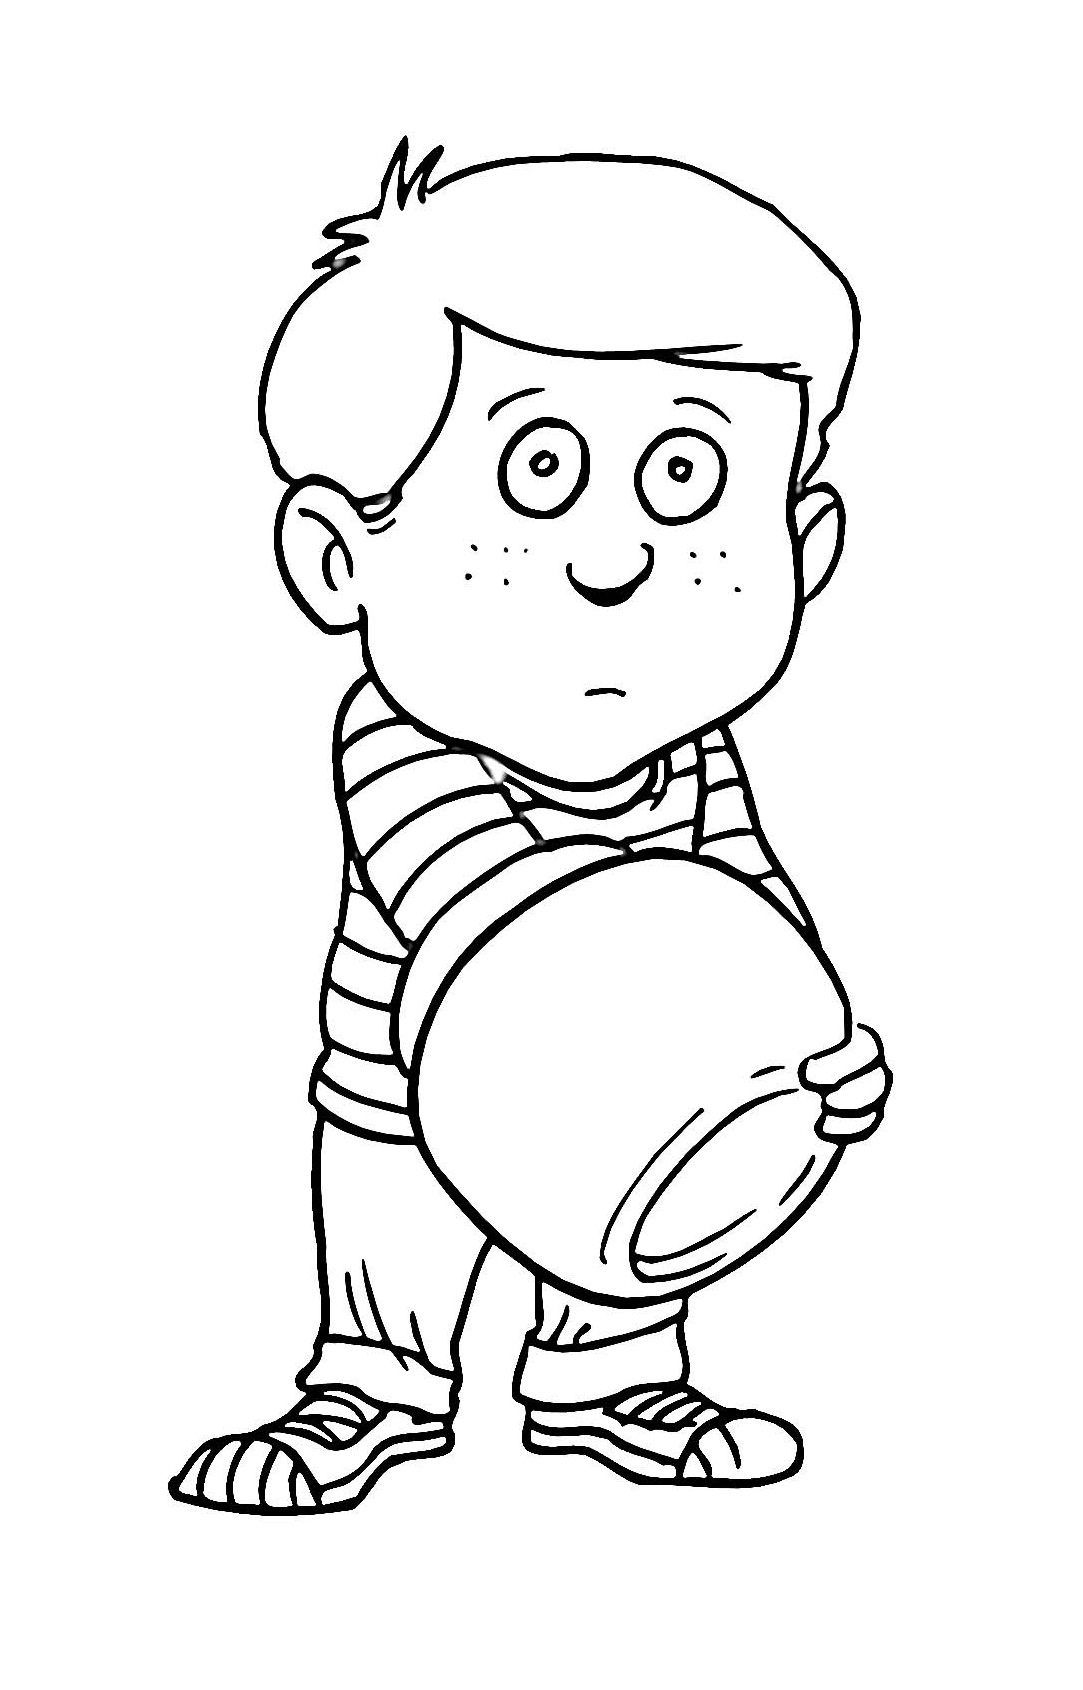  Coloring Pages For Boys To Print For Free 5